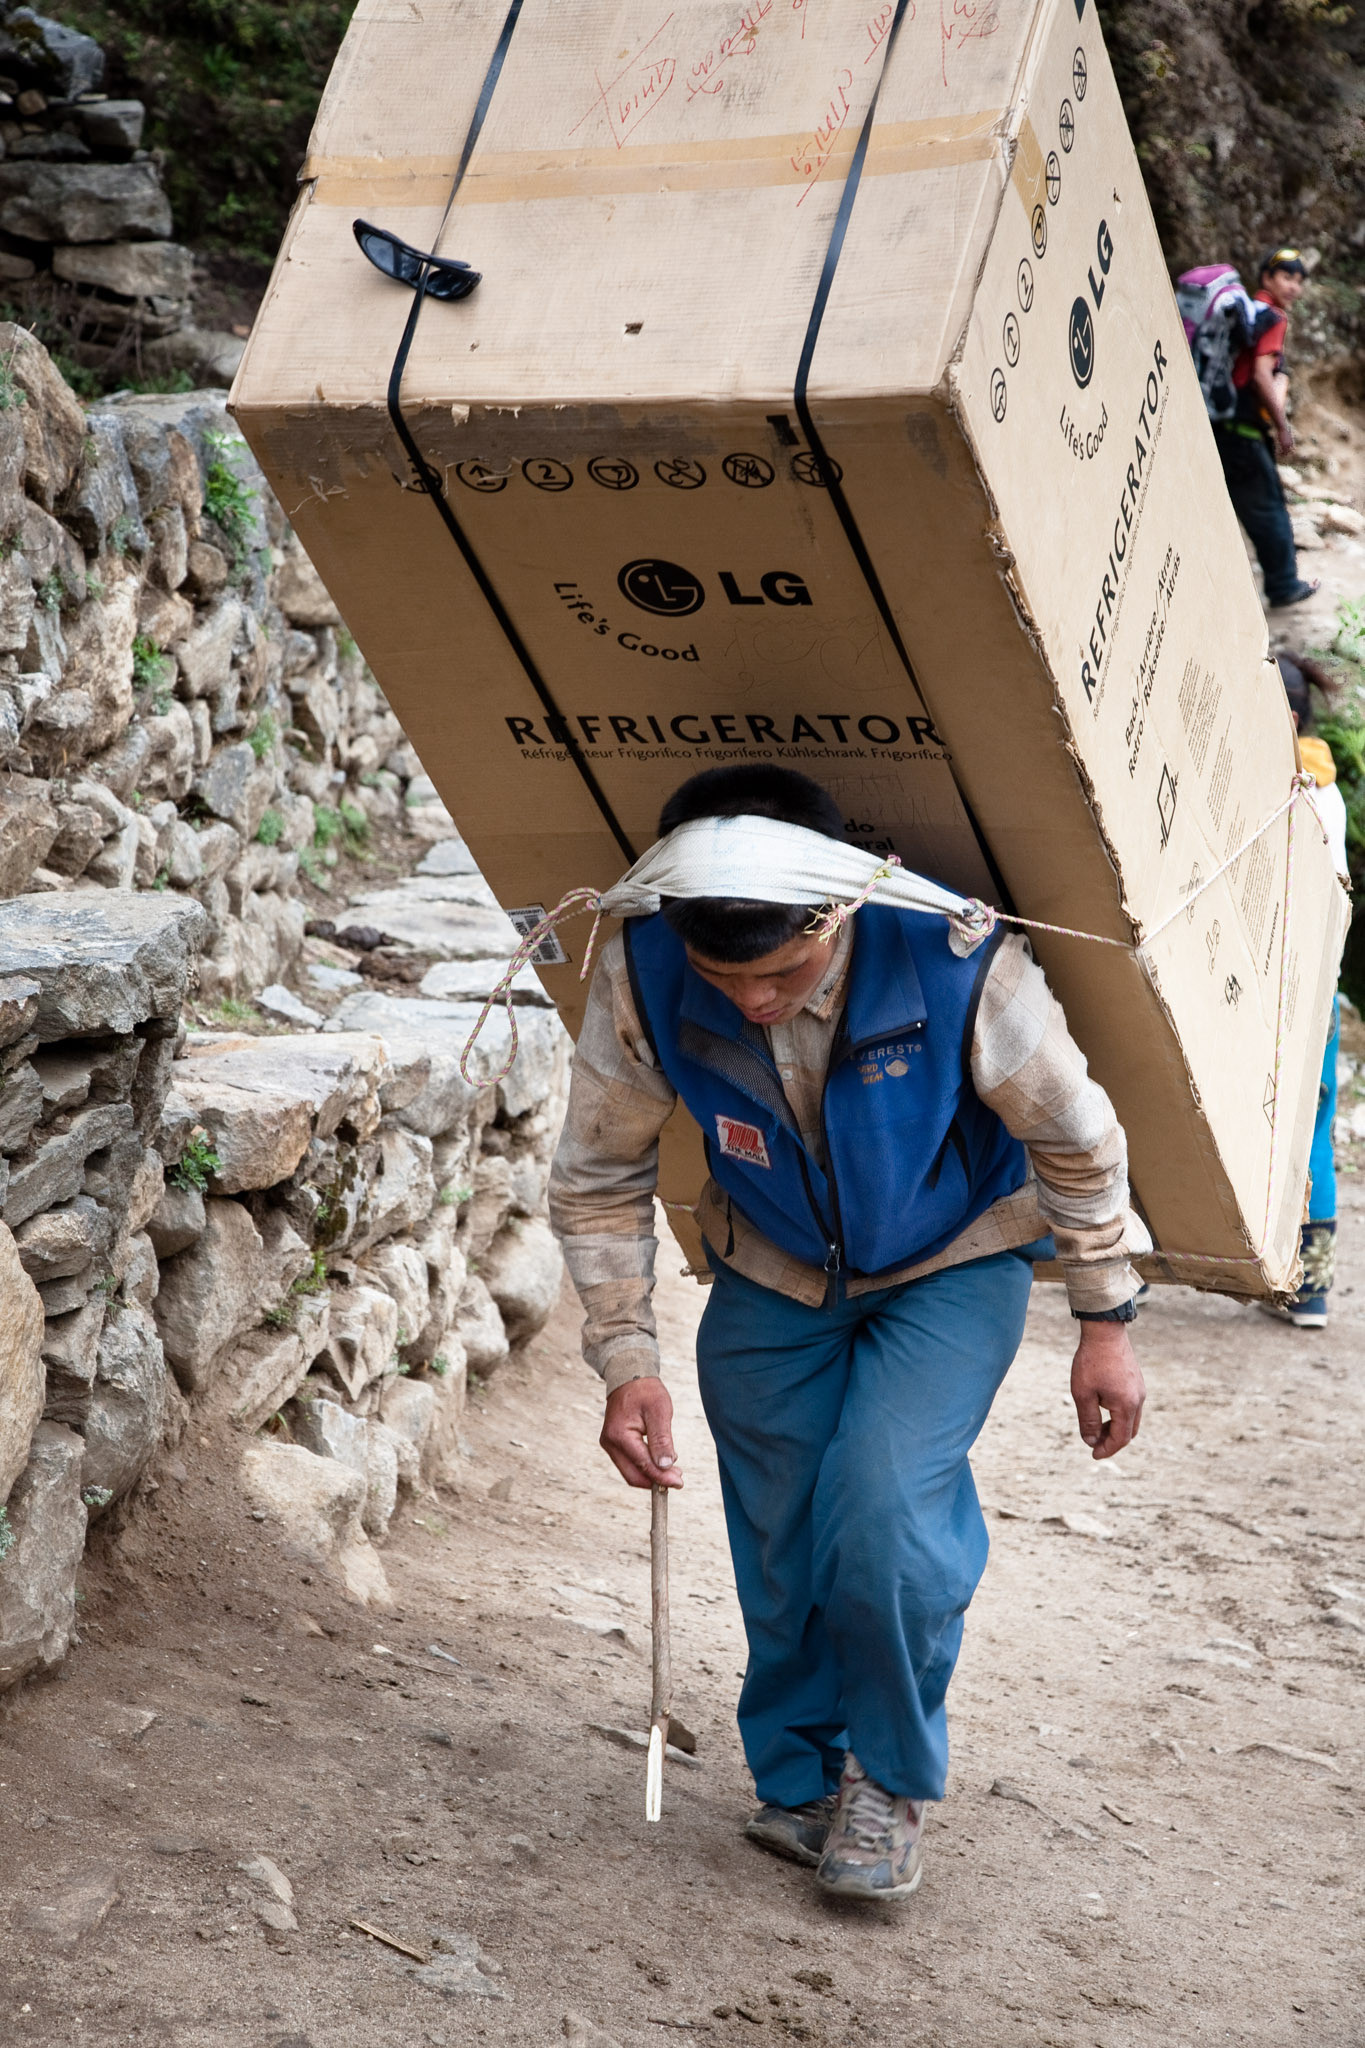 Appliance delivery guy in Nepal